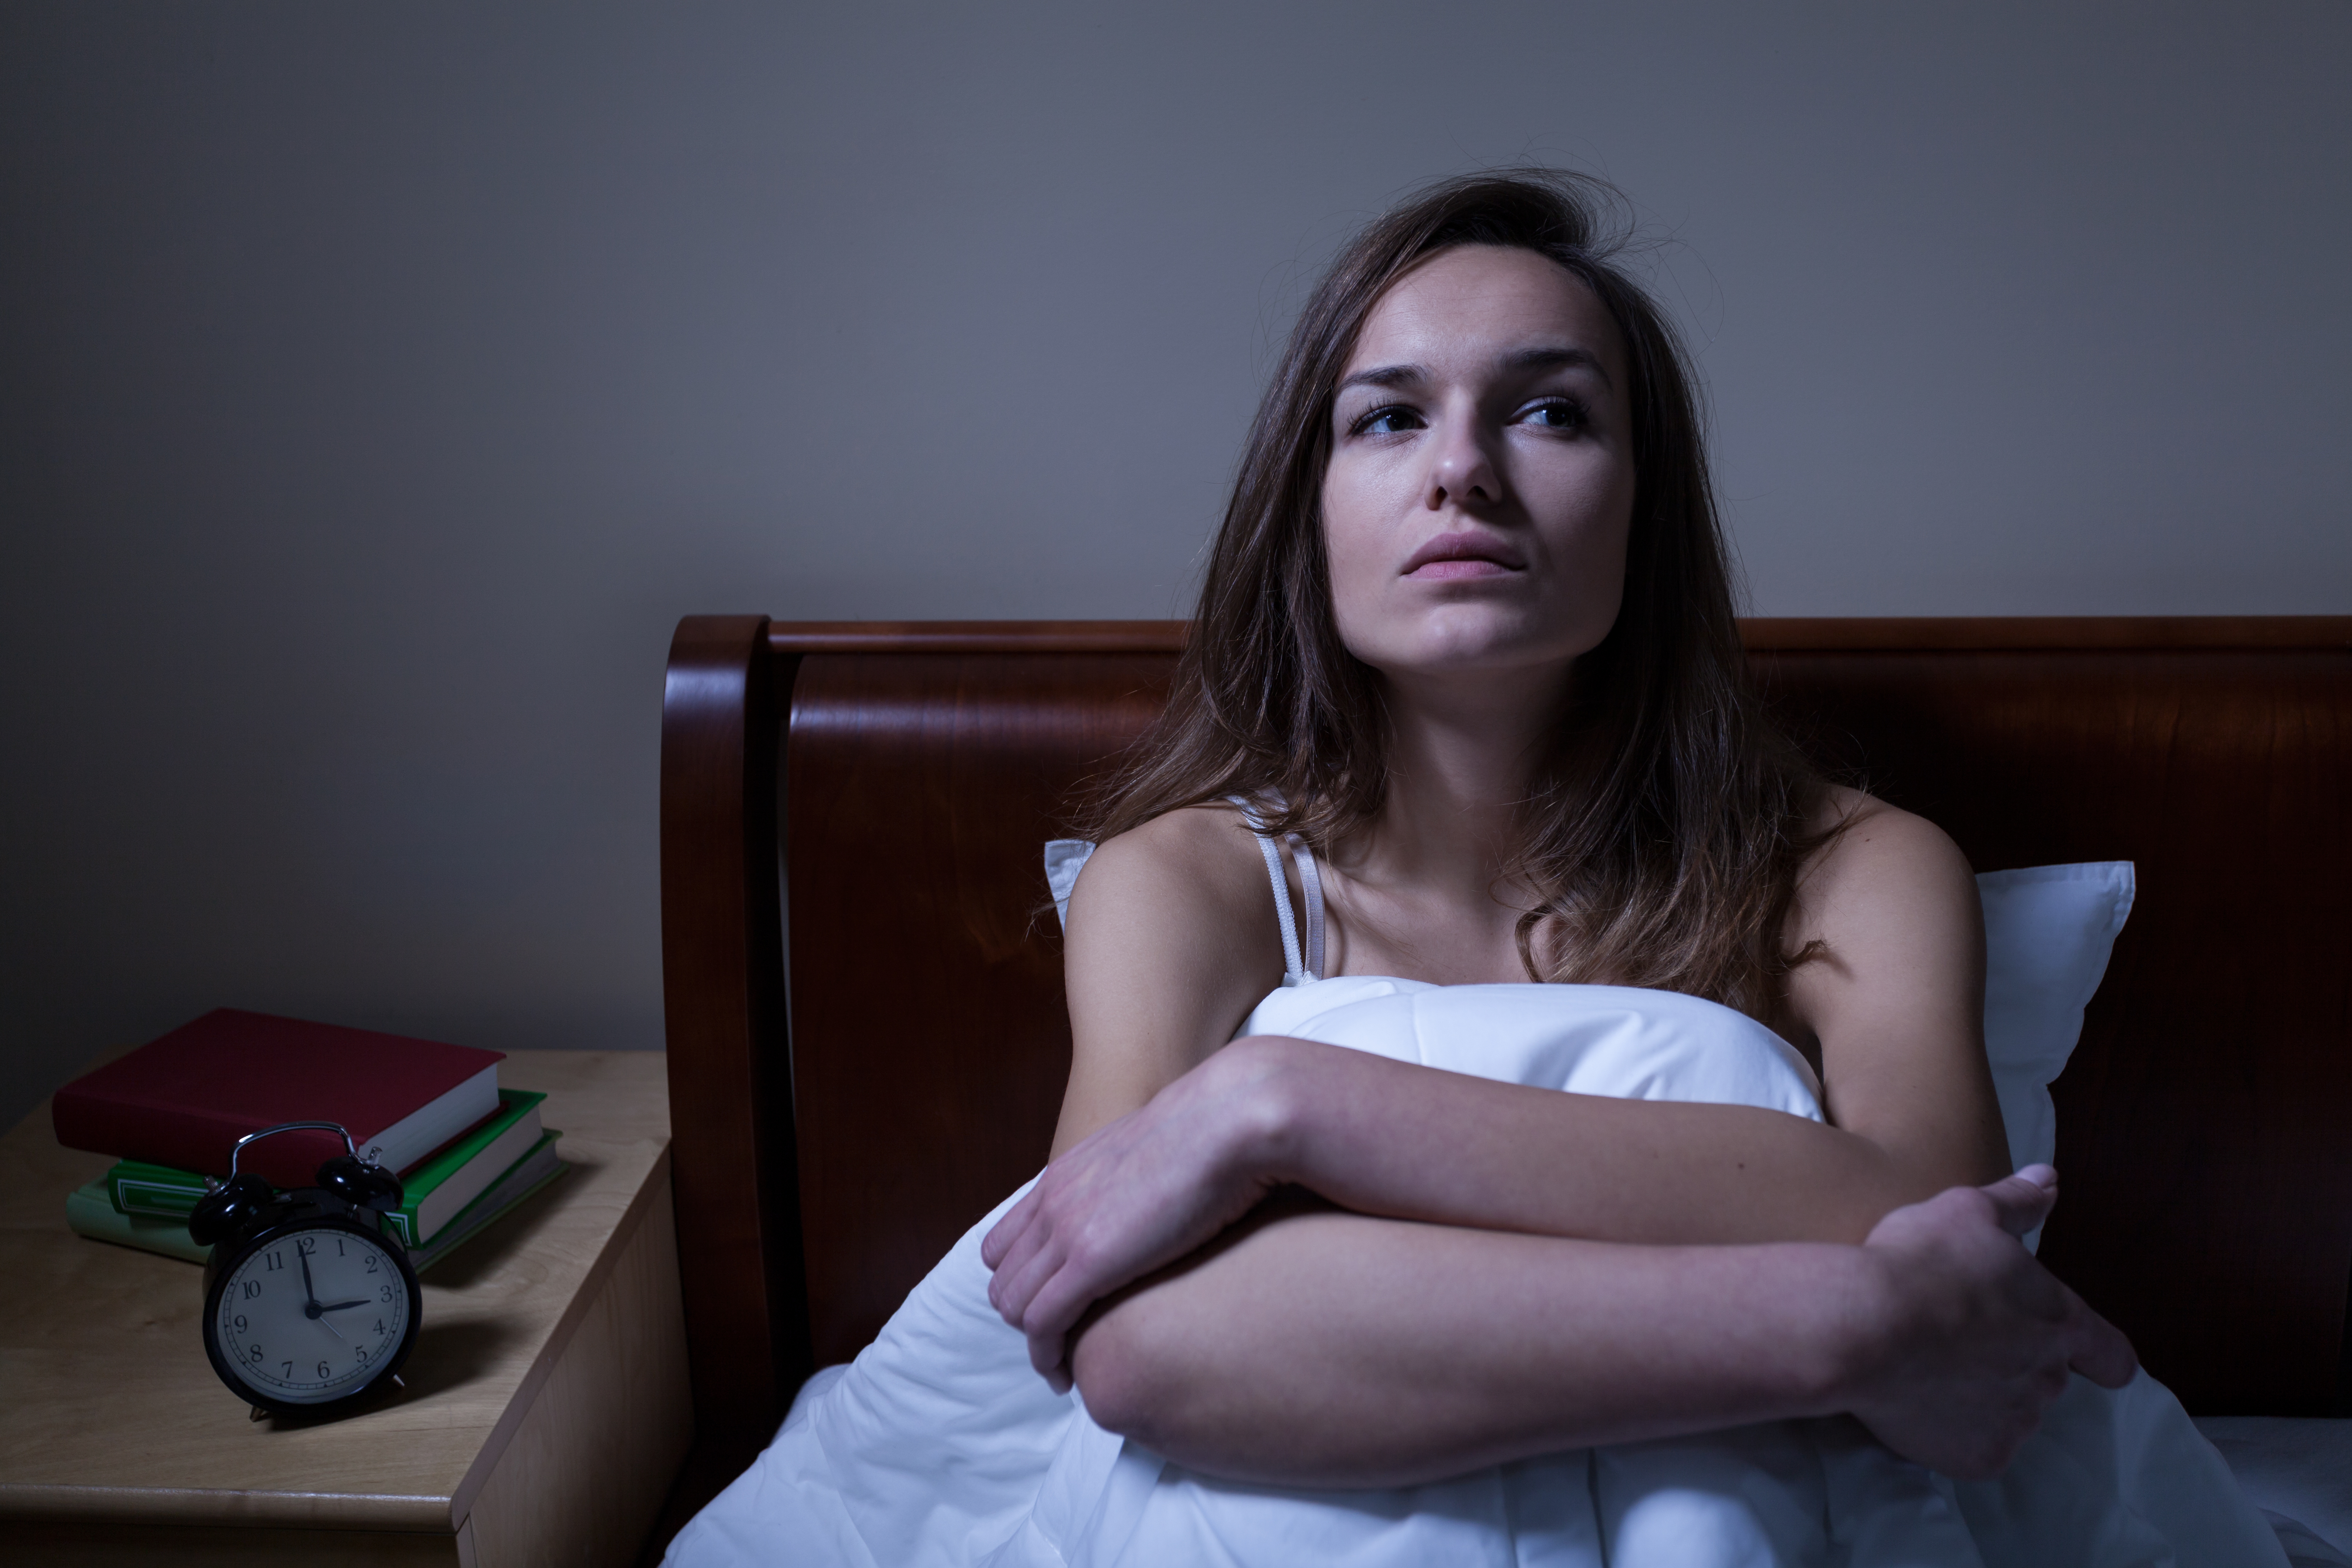 A woman sitting in bed | Source: Shutterstock